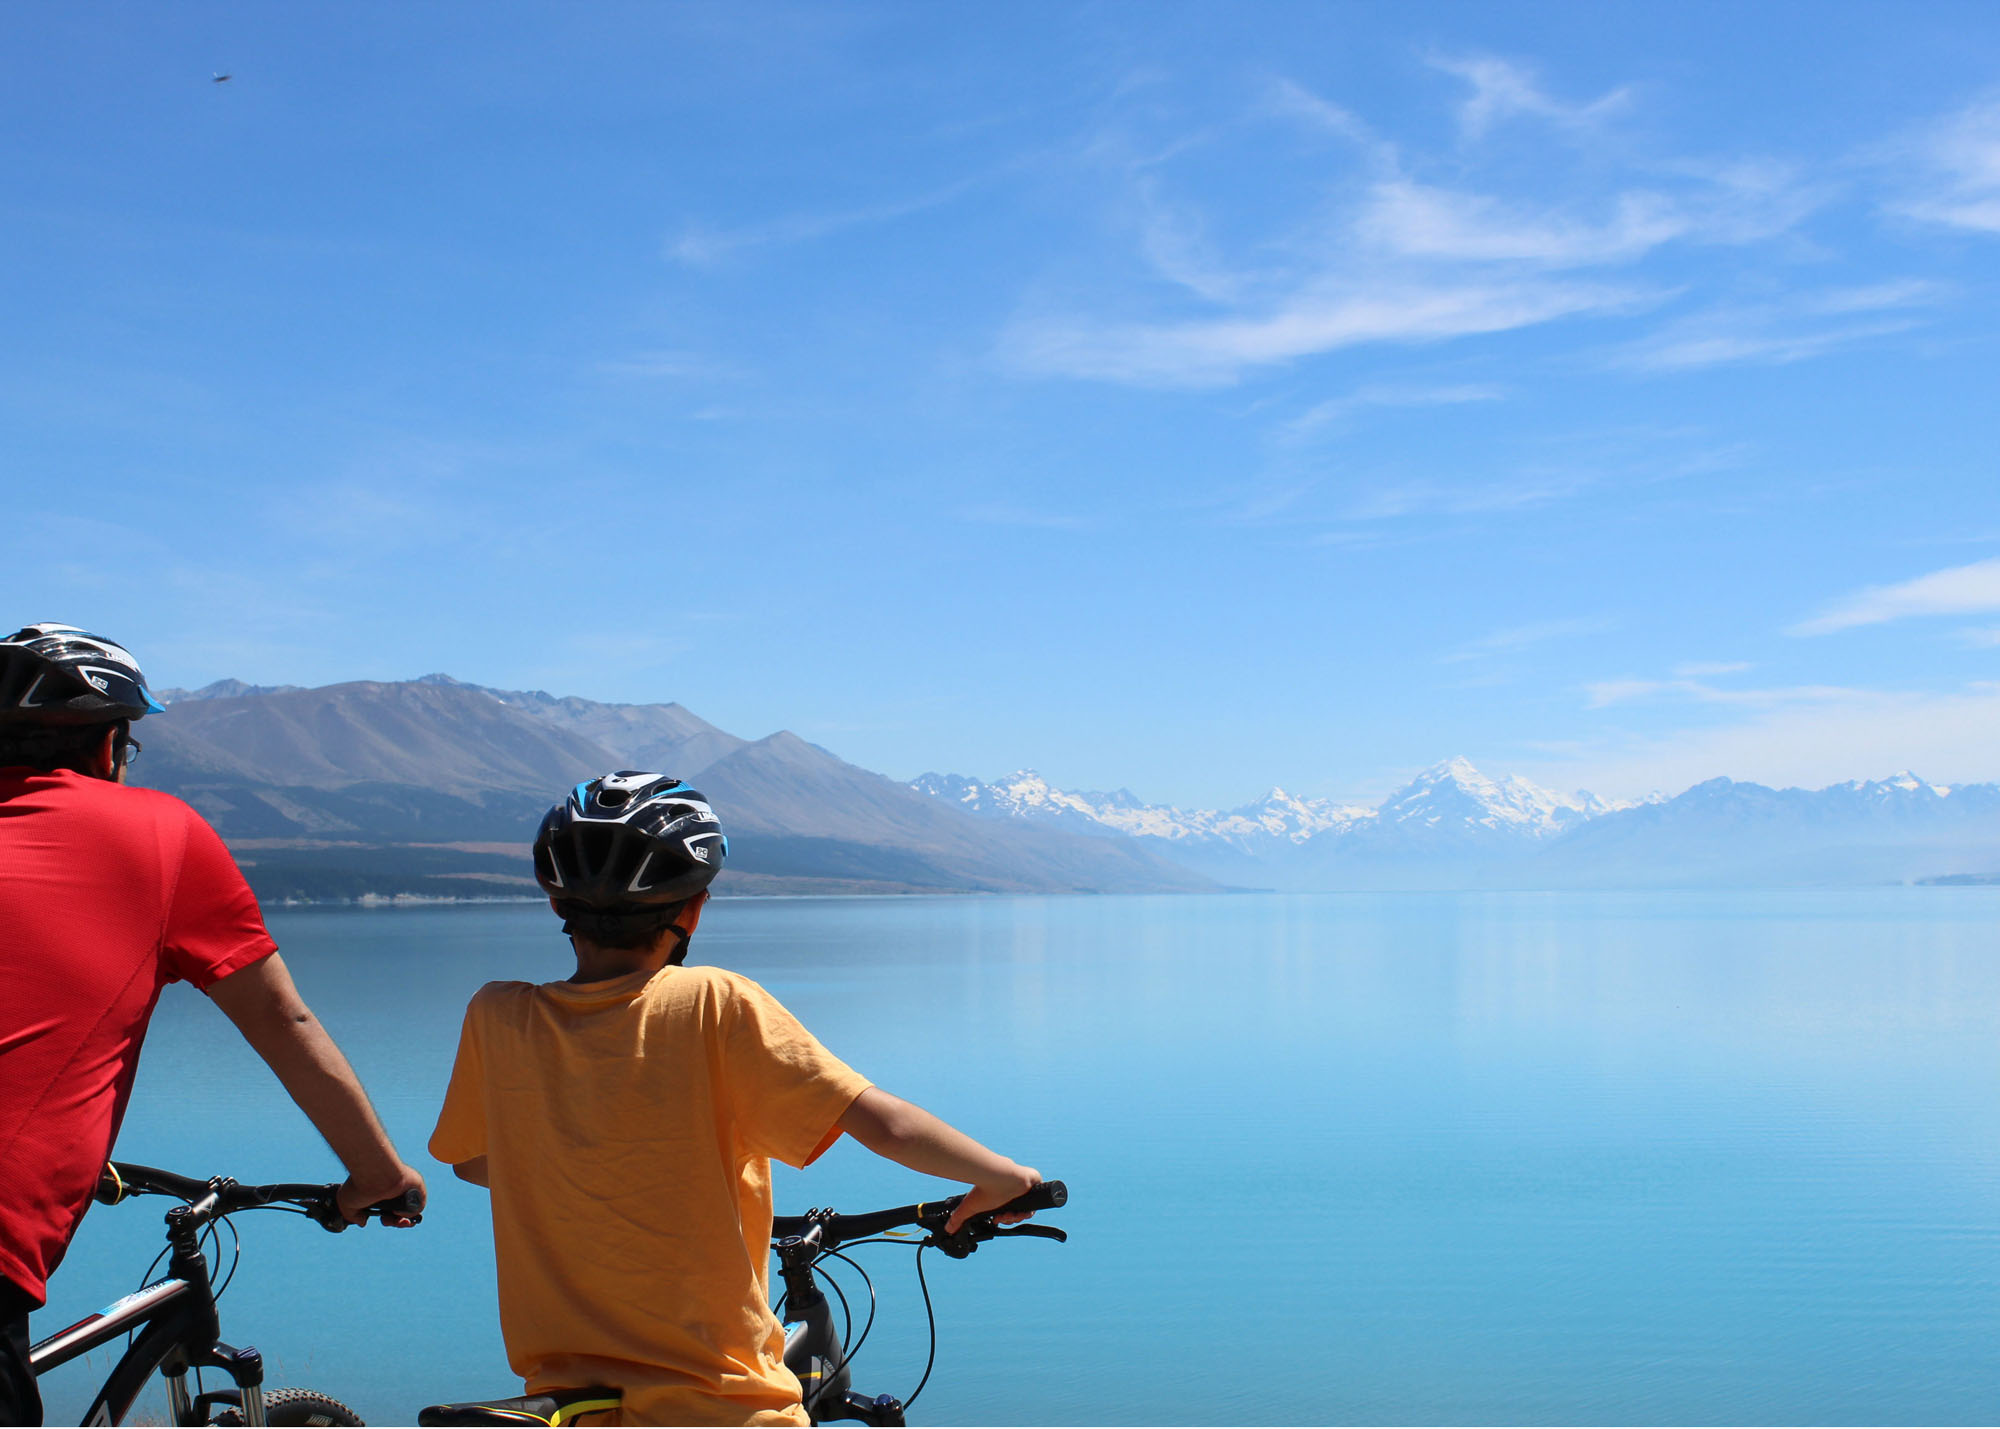 Featured as New Zealand’s longest cycle trail and described by many as the ‘jewel in the crown’ of New Zealand’s 22 Great Rides.